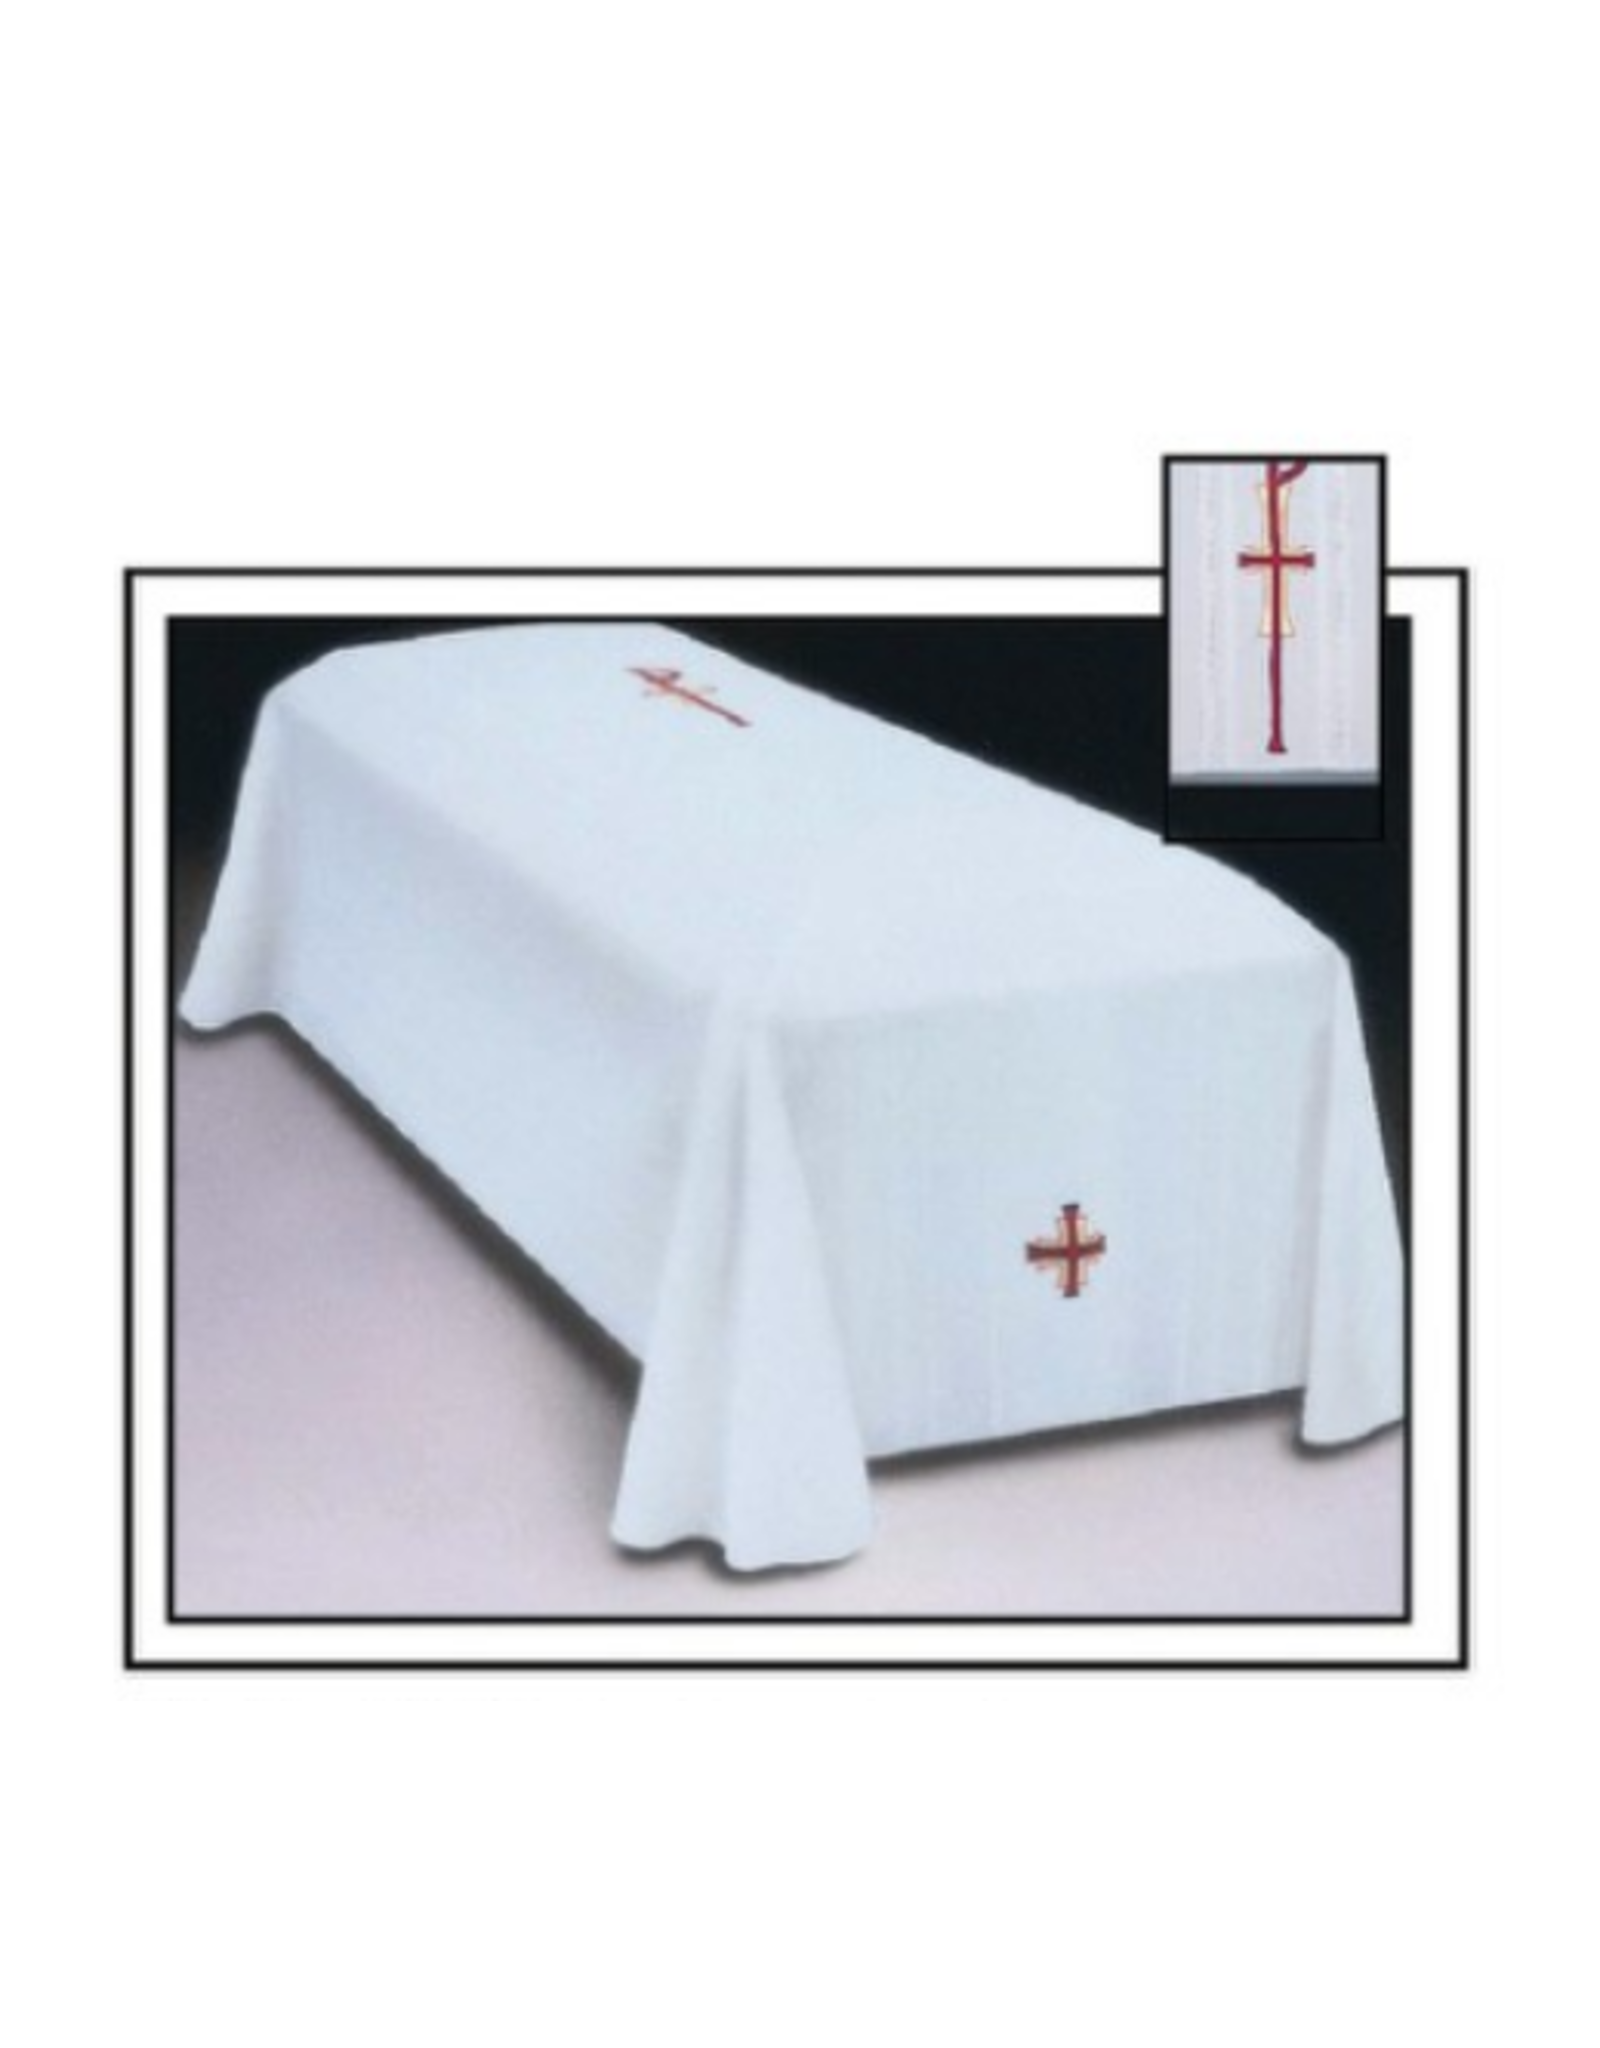 Harbro Urn Cover with Multicolor Cross